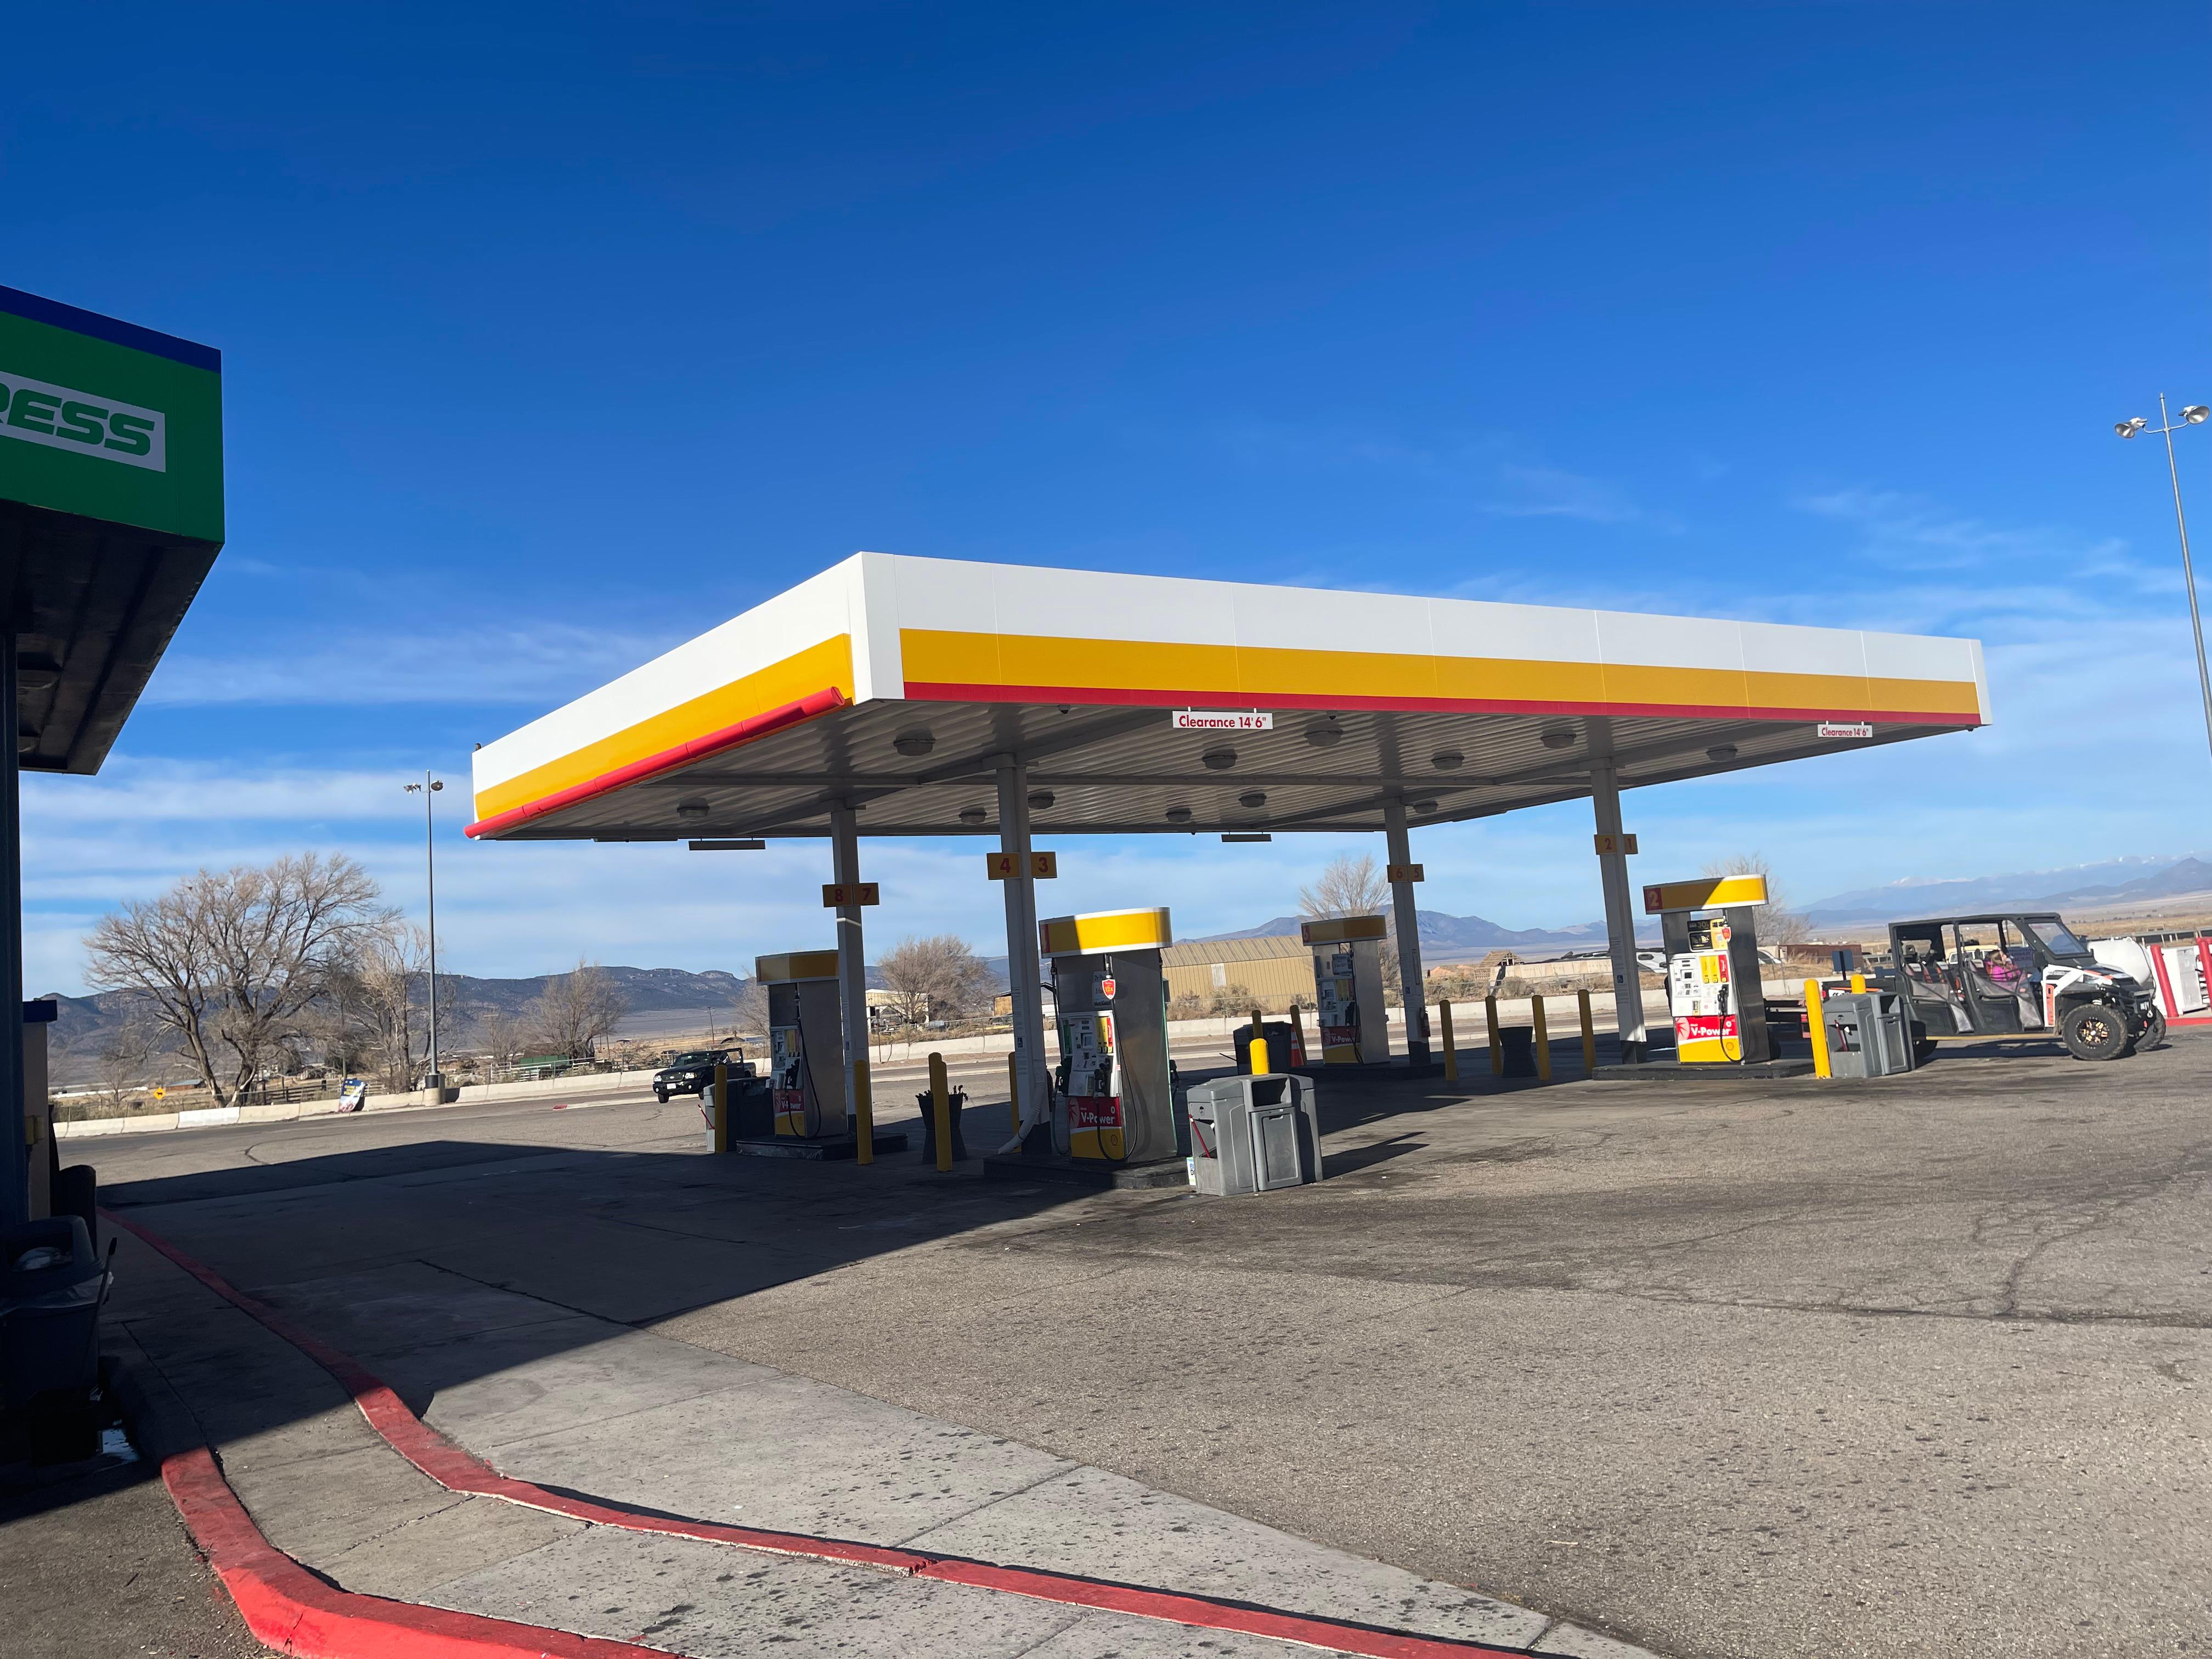 Make TA Express in Parowan, UT on I-15 at Exit 78 a part of your route. We’re ready to fuel your trip with Shell gas or diesel 24/7.